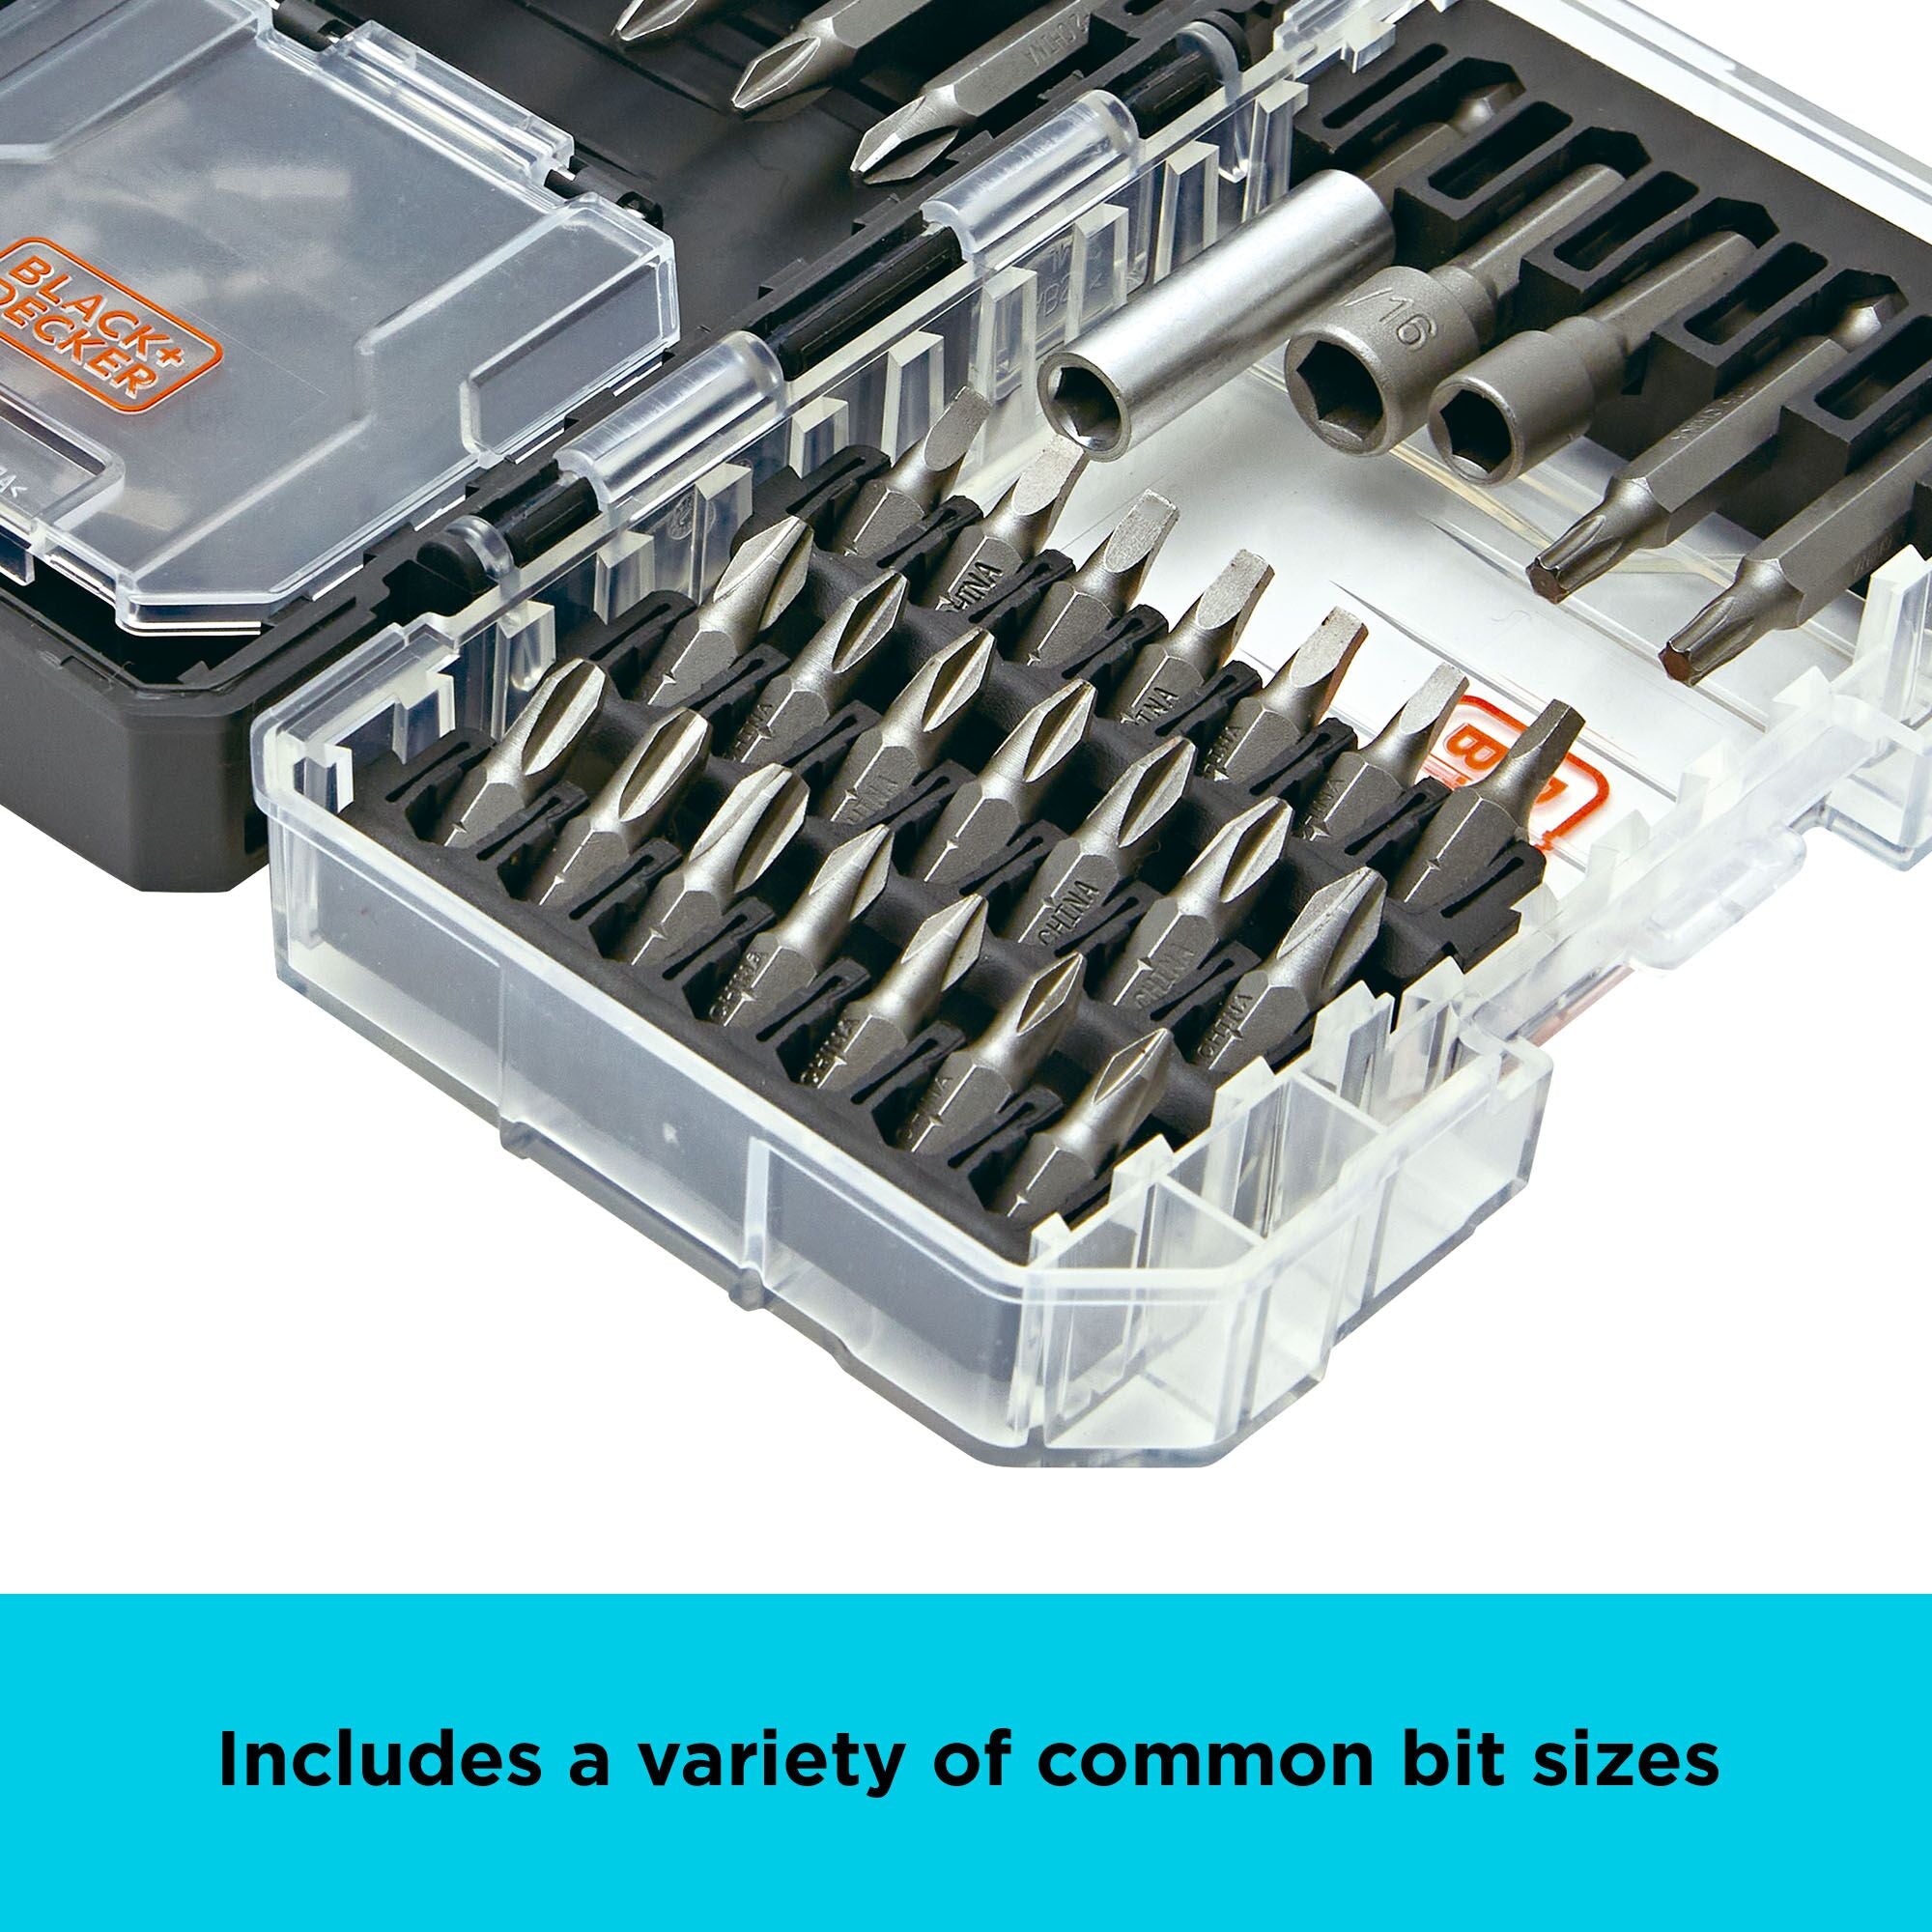 The BLACK+DECKER 40-piece screwdriving set includes a variety of common bit sizes